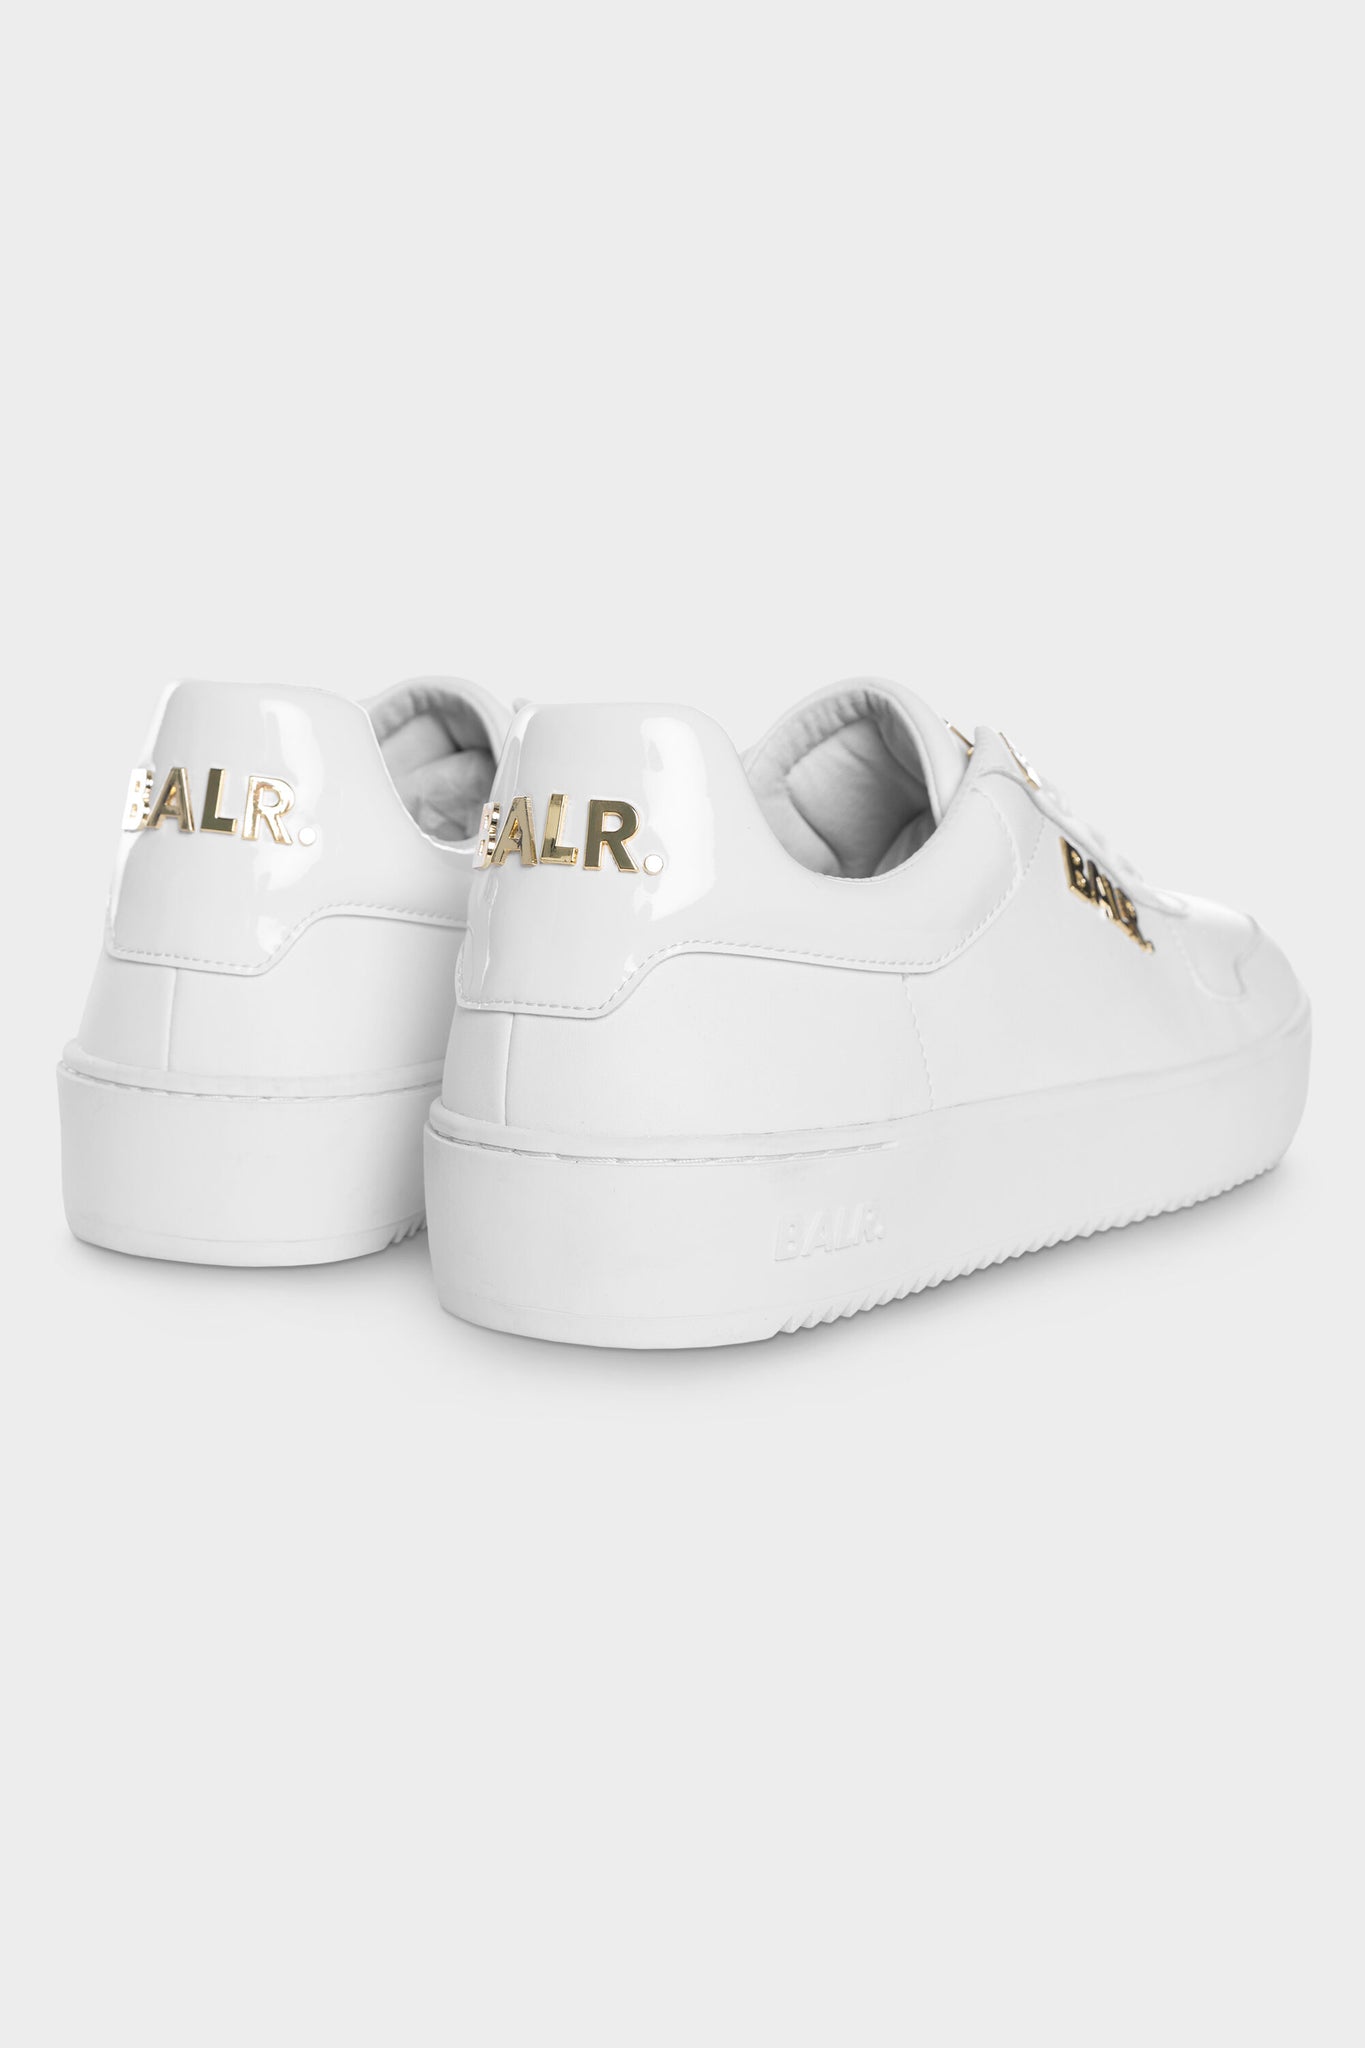 white and gold shoes mens